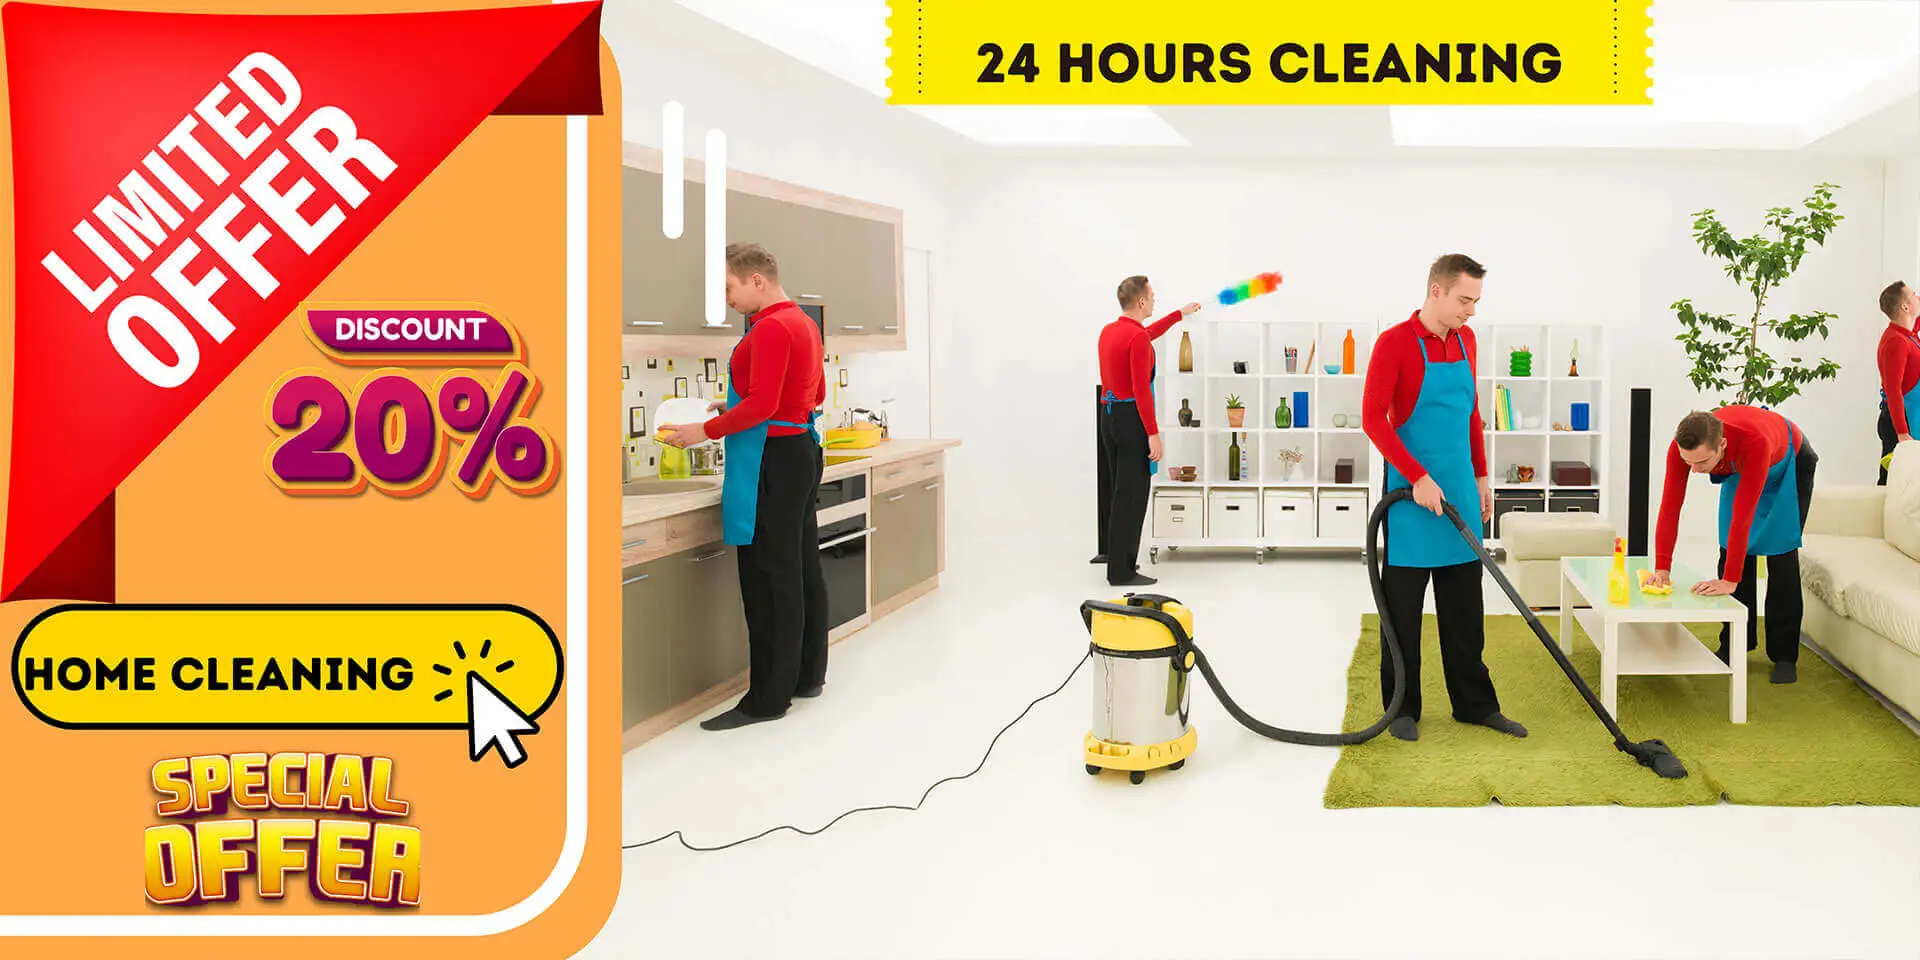 house CLeaning services